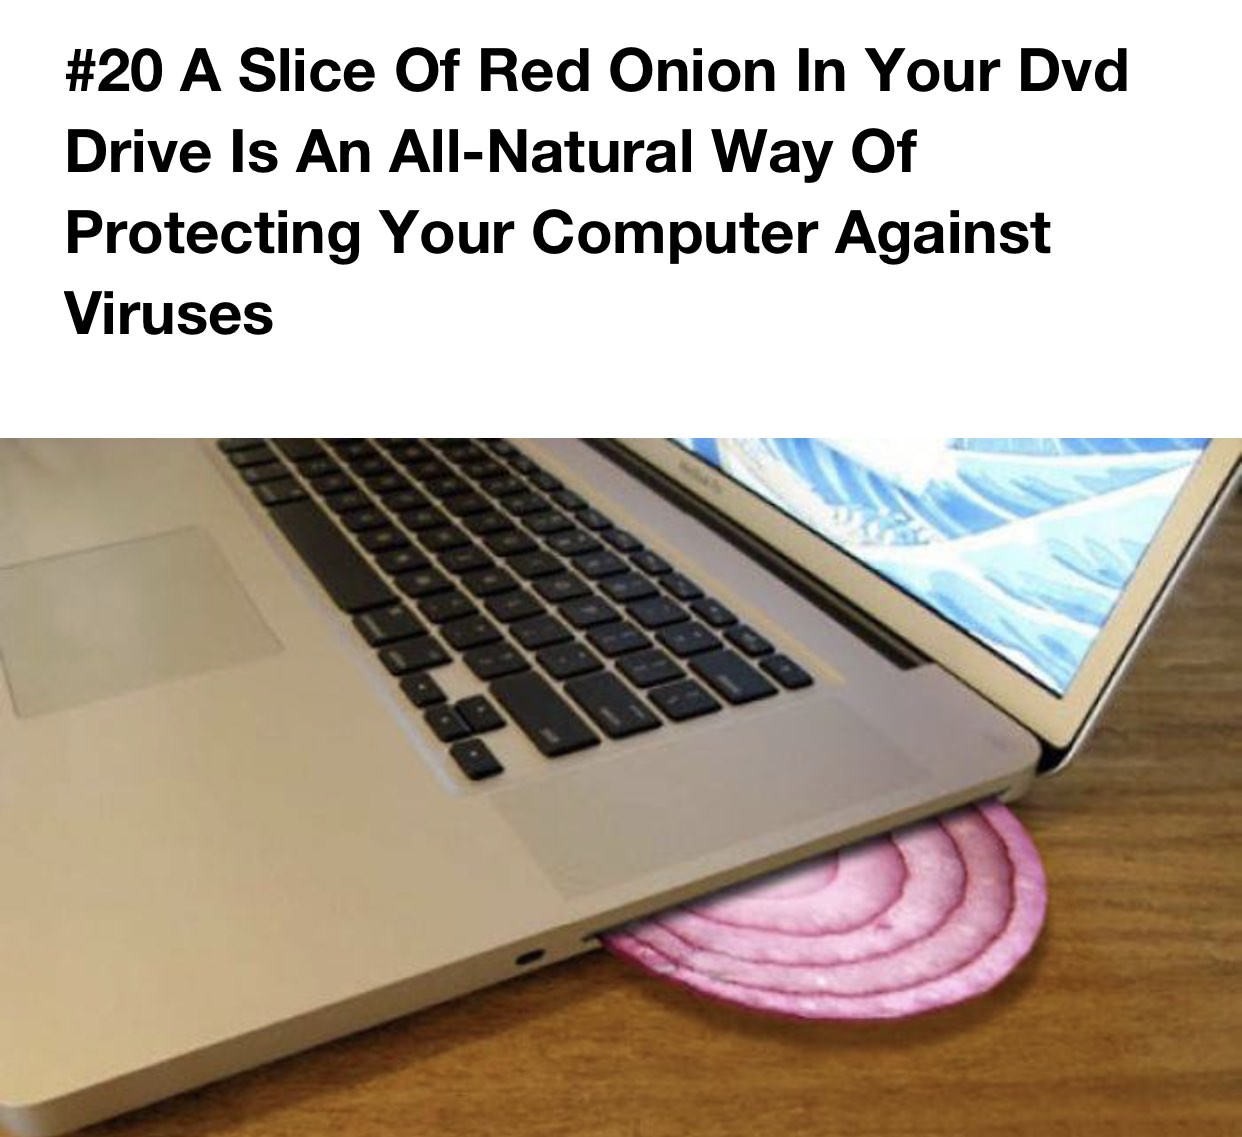 onion computer - A Slice Of Red Onion In Your Dvd Drive Is An AllNatural Way Of Protecting Your Computer Against Viruses